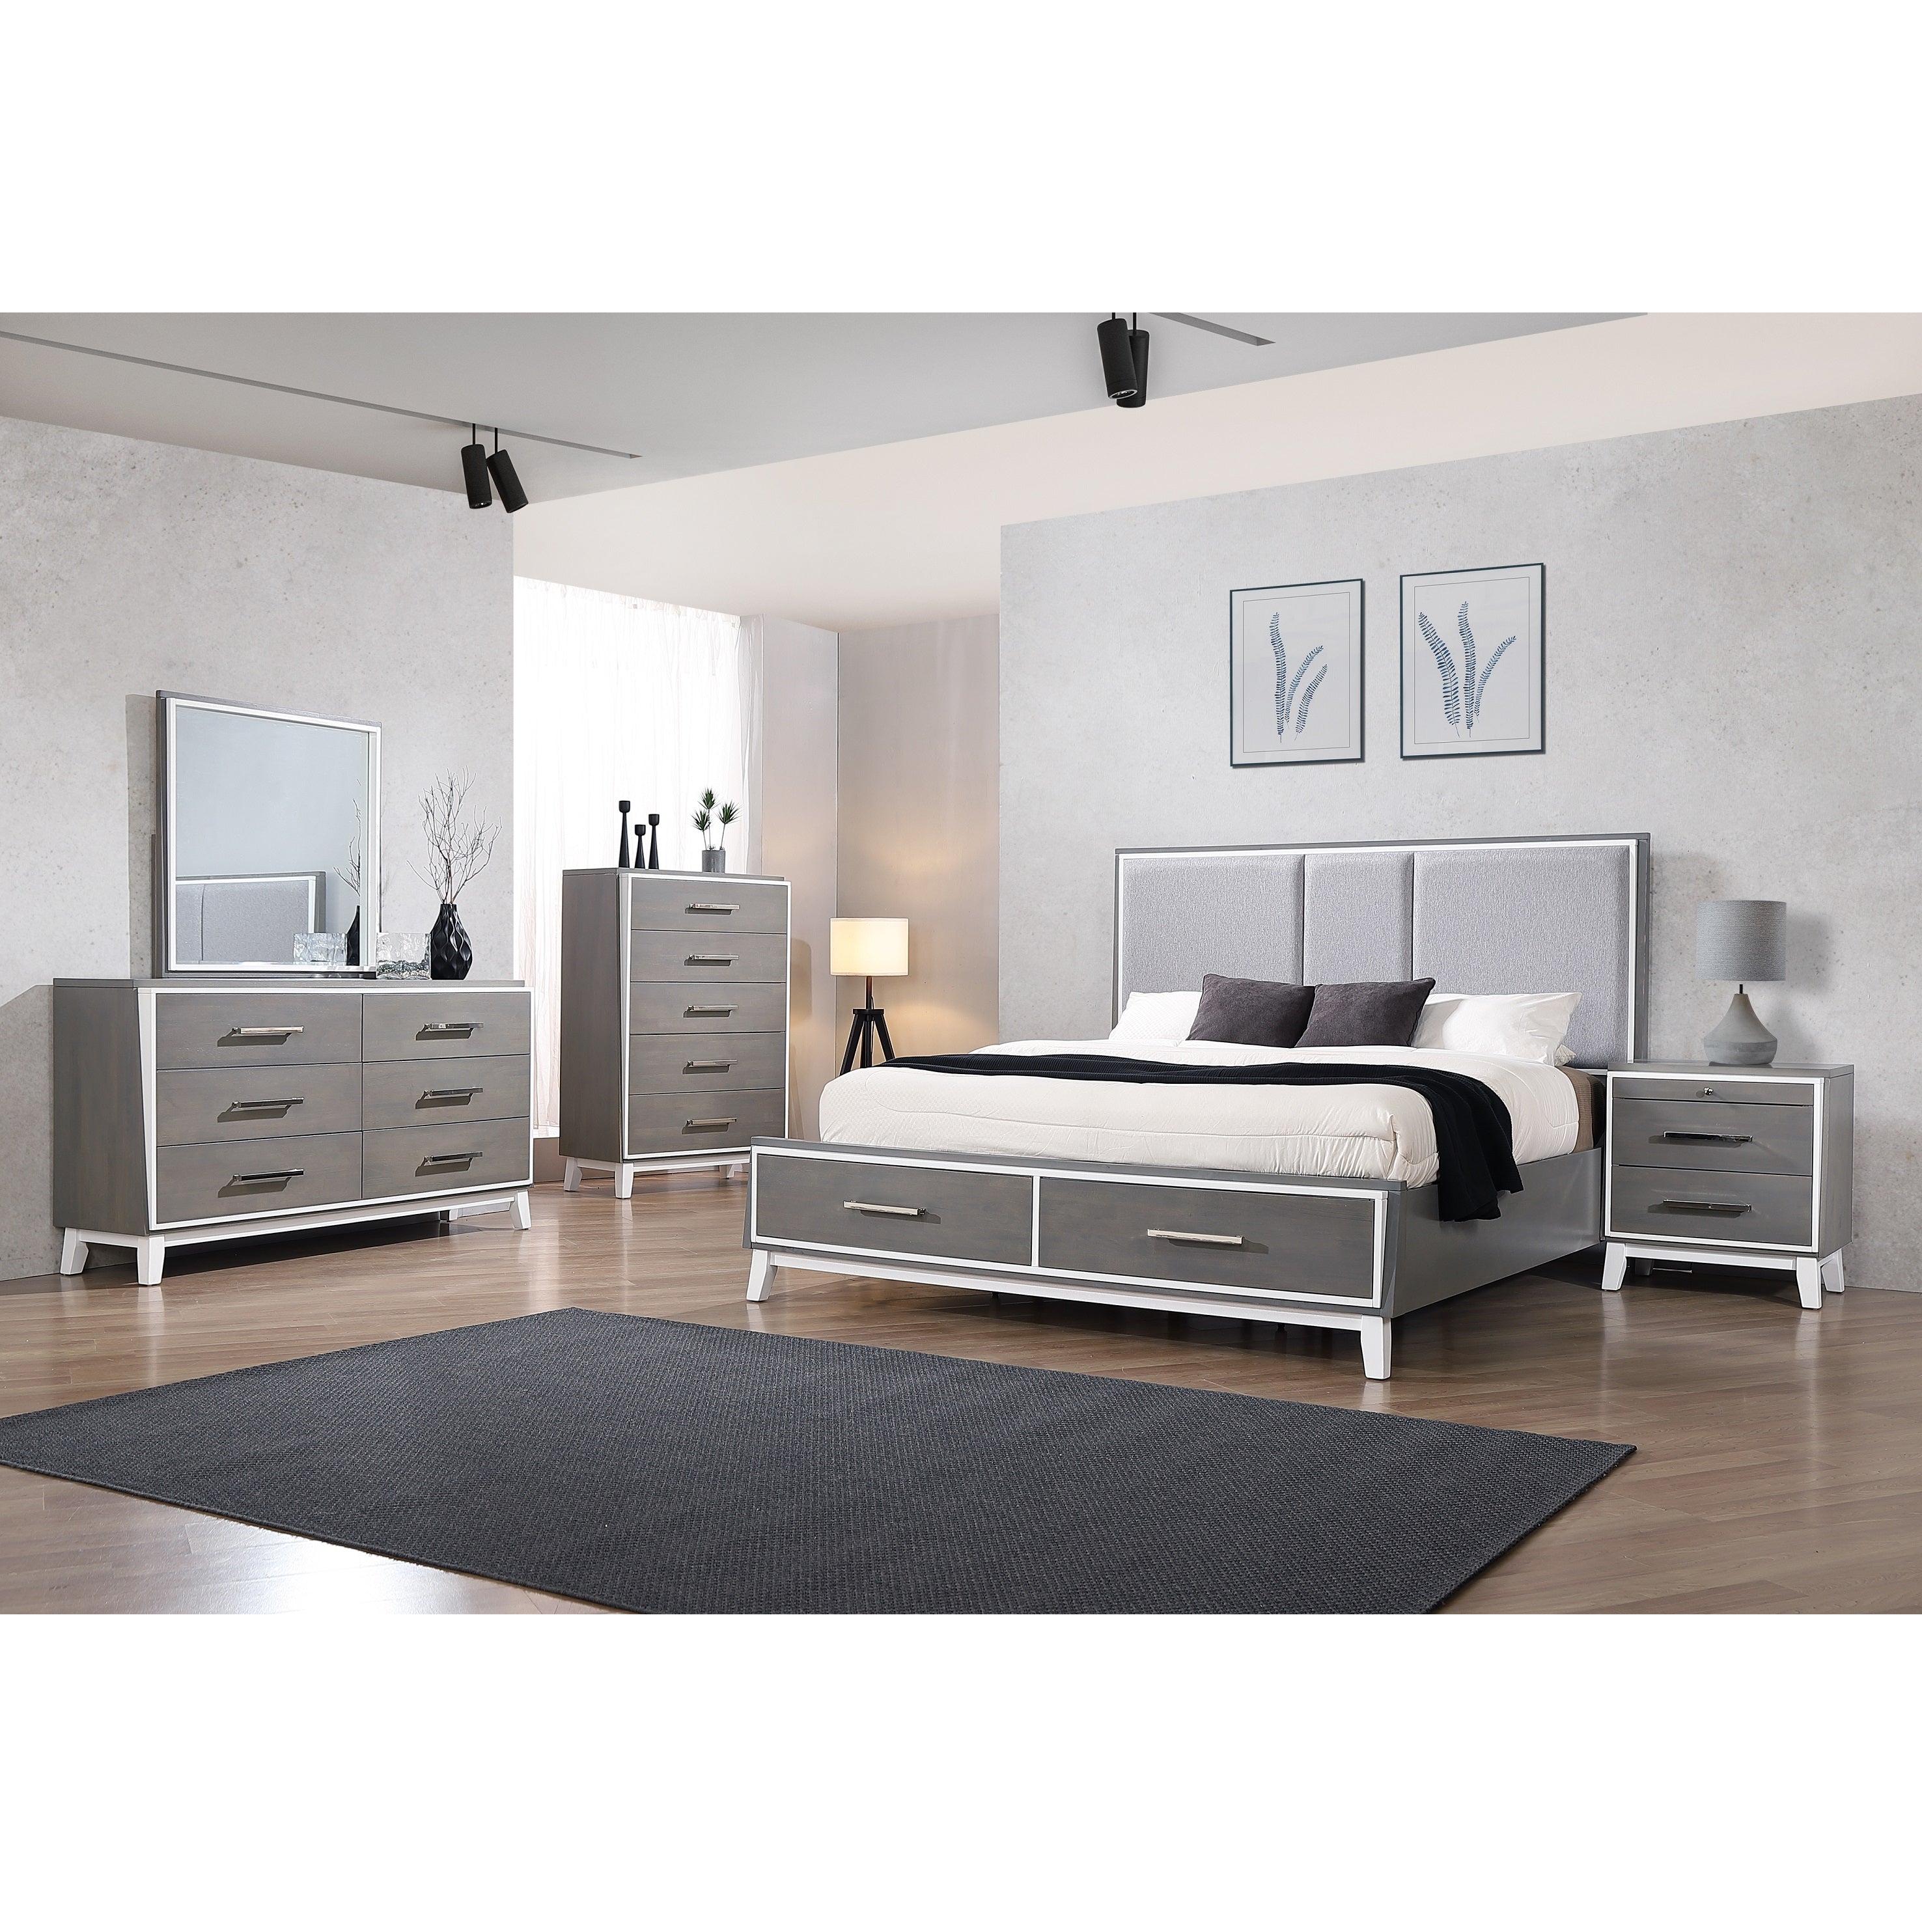 Zephyr - King Bed w/ 2 Drawers + Dresser + Mirror + Nightstand - White/Gray